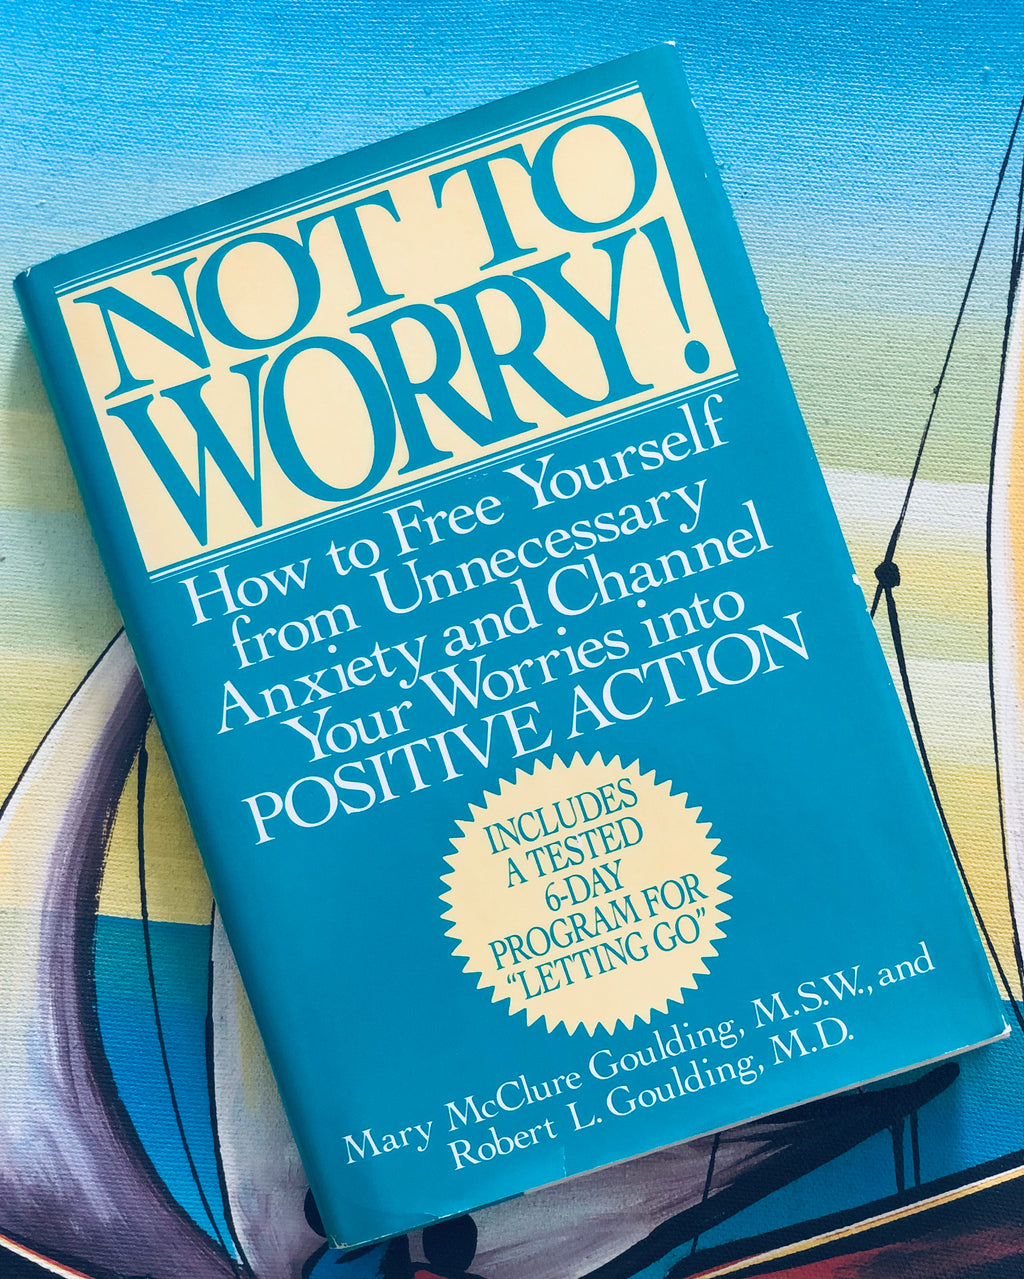 Not to Worry- By Mary McClure Goulding, and Robert L. Goulding